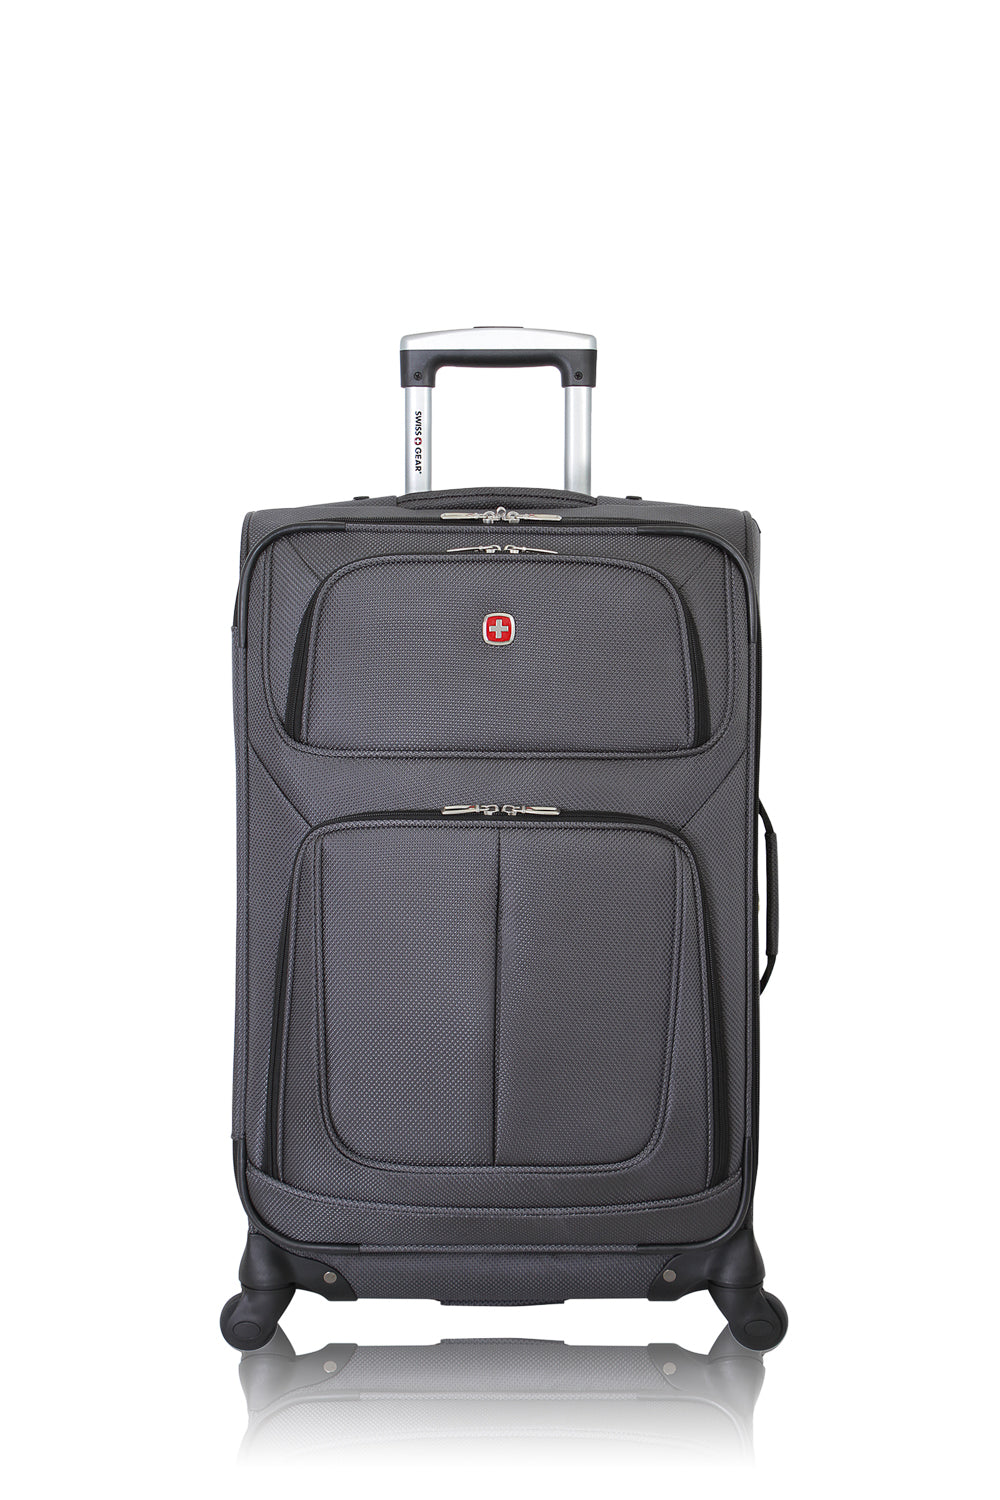 SwissGear 6283 24.5" Expandable Spinner Suitcase